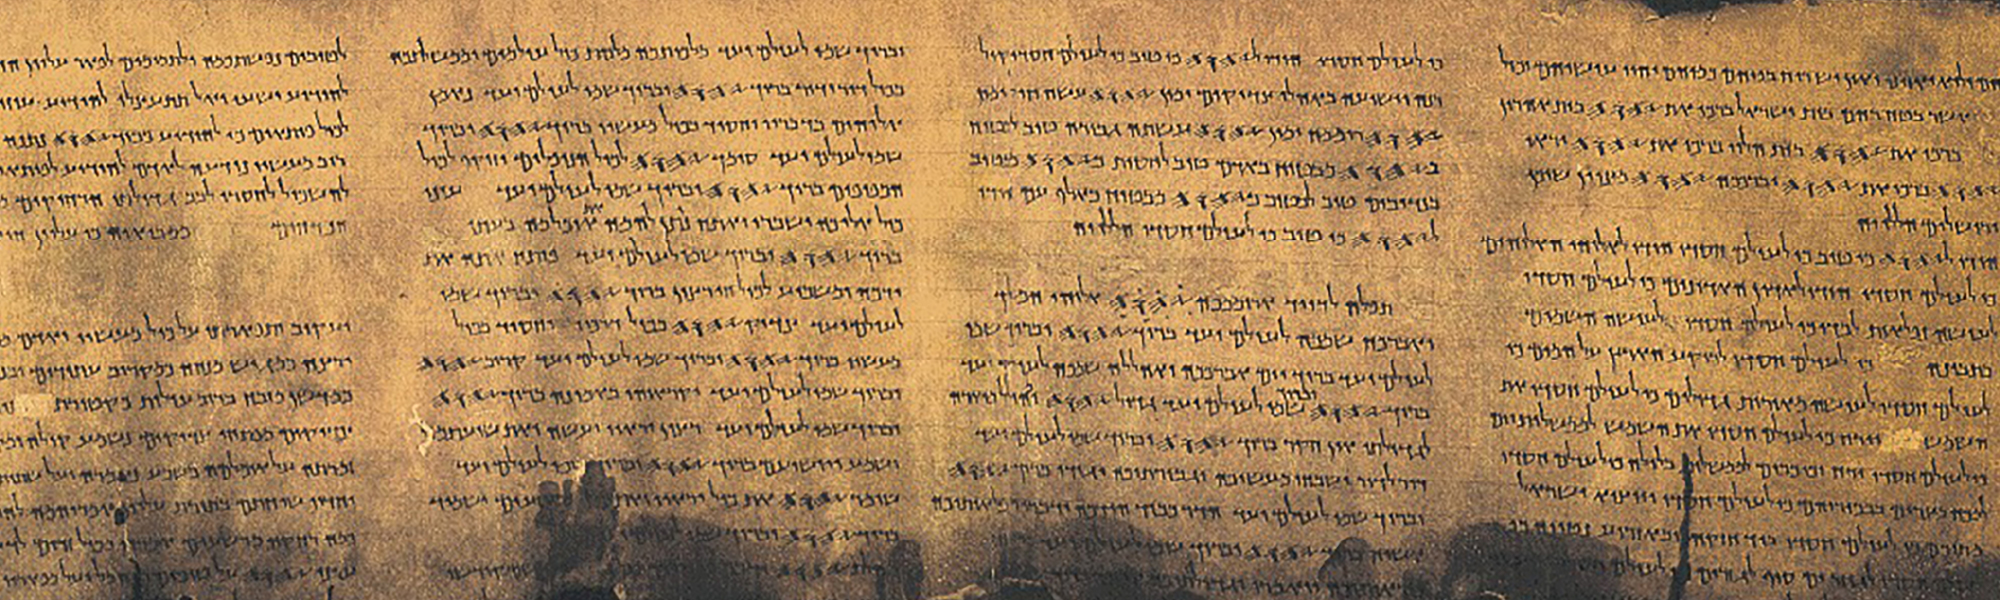 A photo showing the psalms